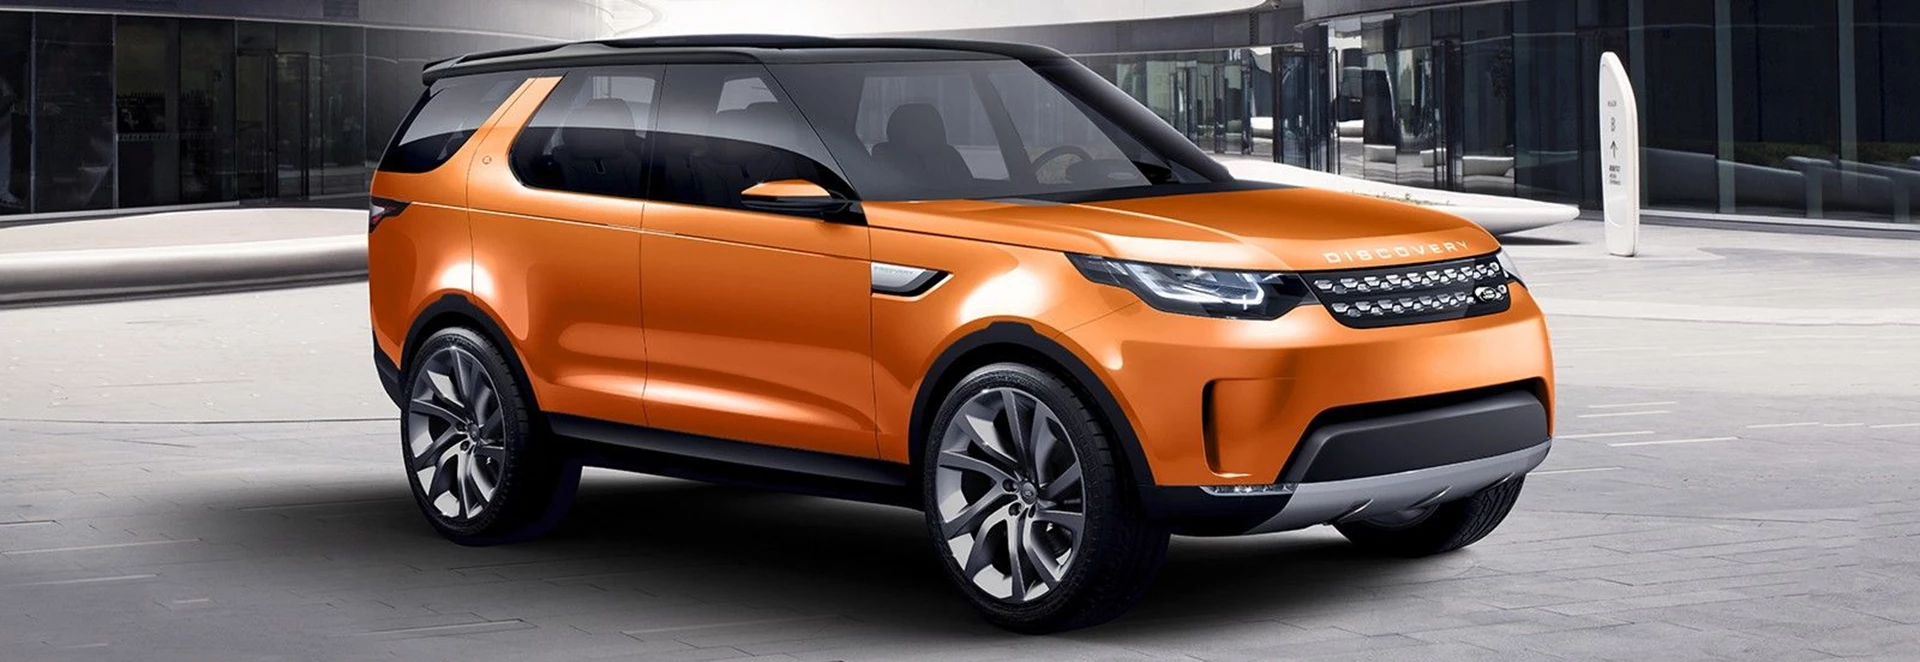 Here’s your first sneak peek at the all-new Land Rover Discovery 5